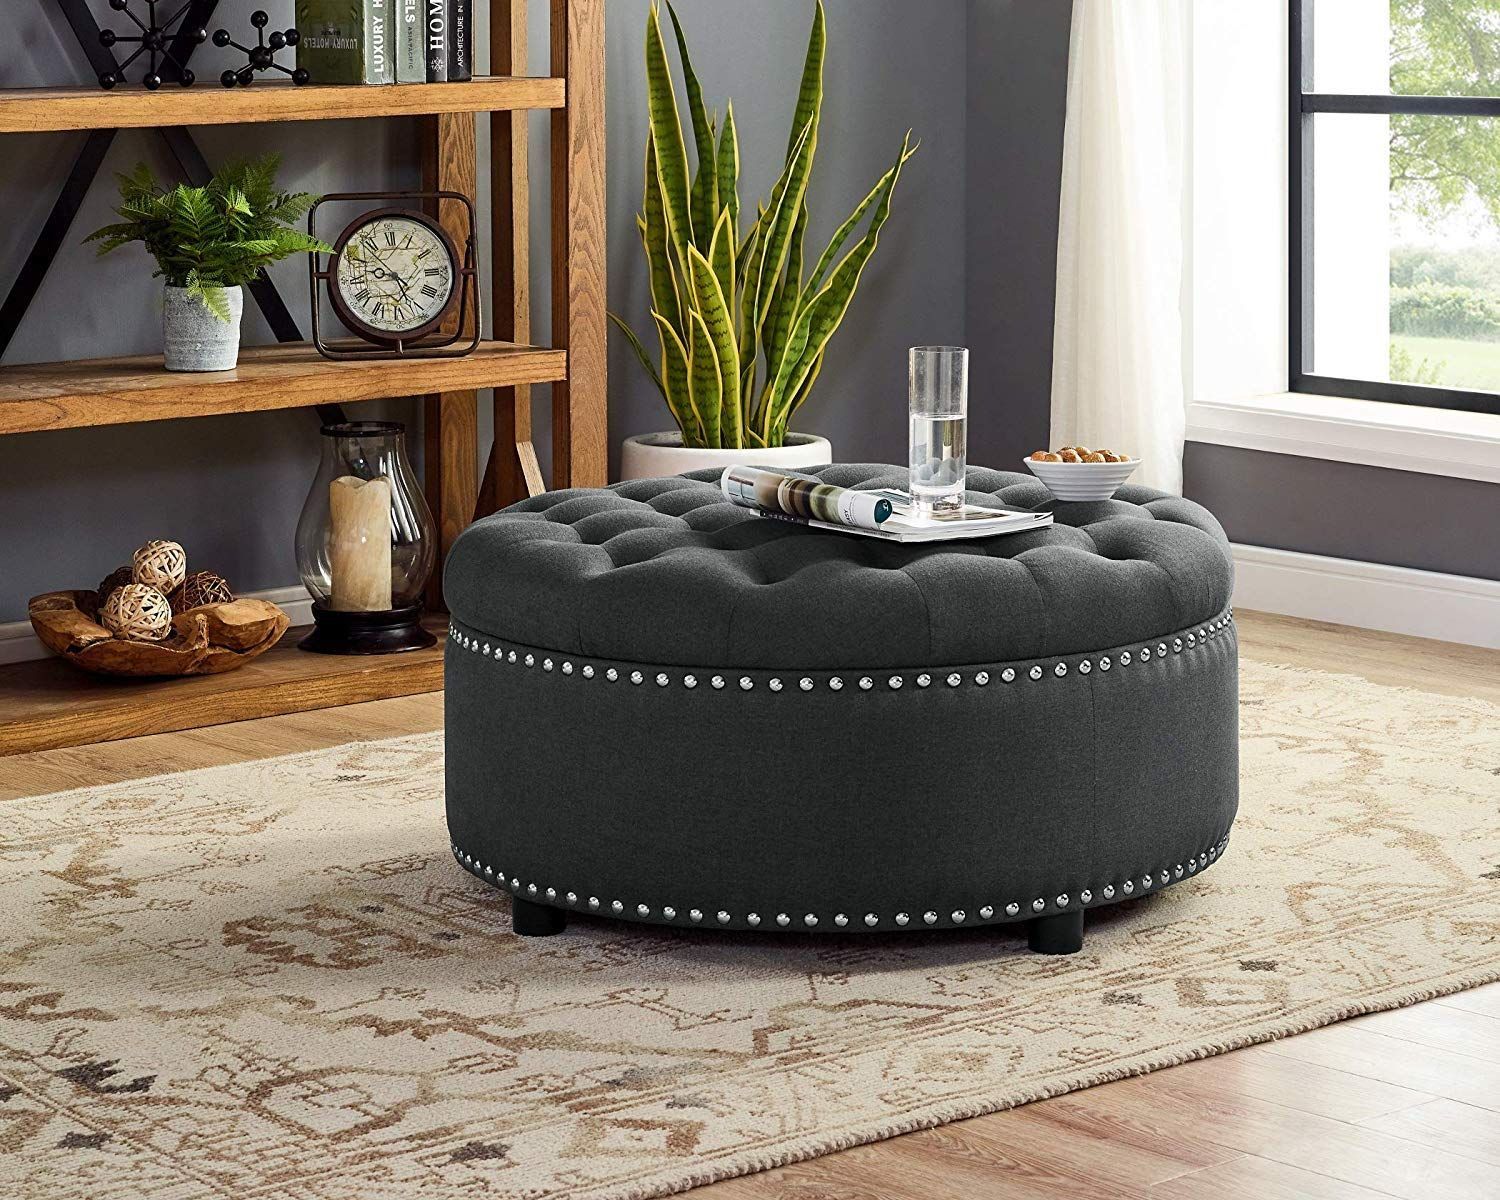 Dazone Round Storage Ottoman, Fabric Upholstered Nailhead Studded Within Lavender Fabric Storage Ottomans (View 6 of 20)